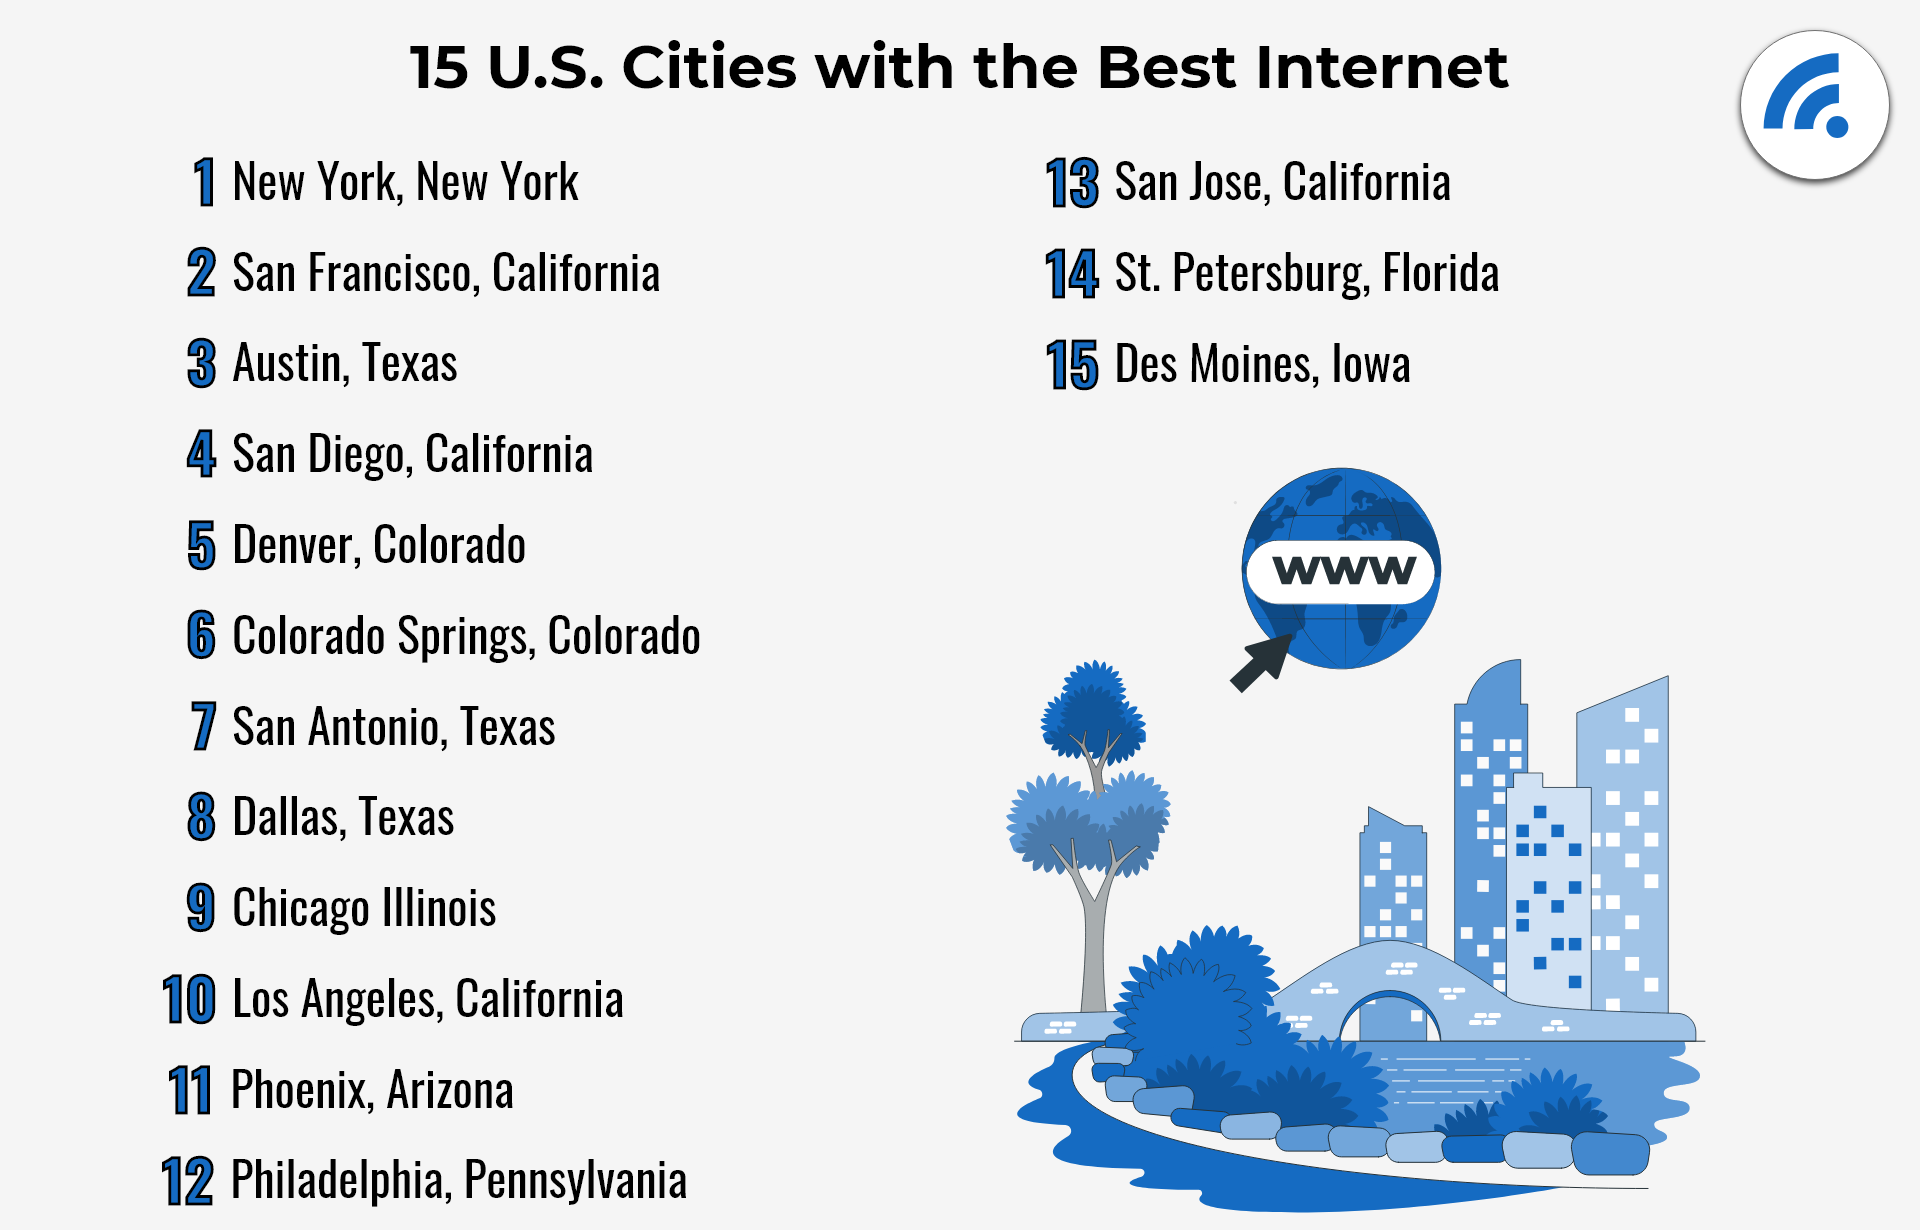 The 15 Cities in the United States with the Best Internet